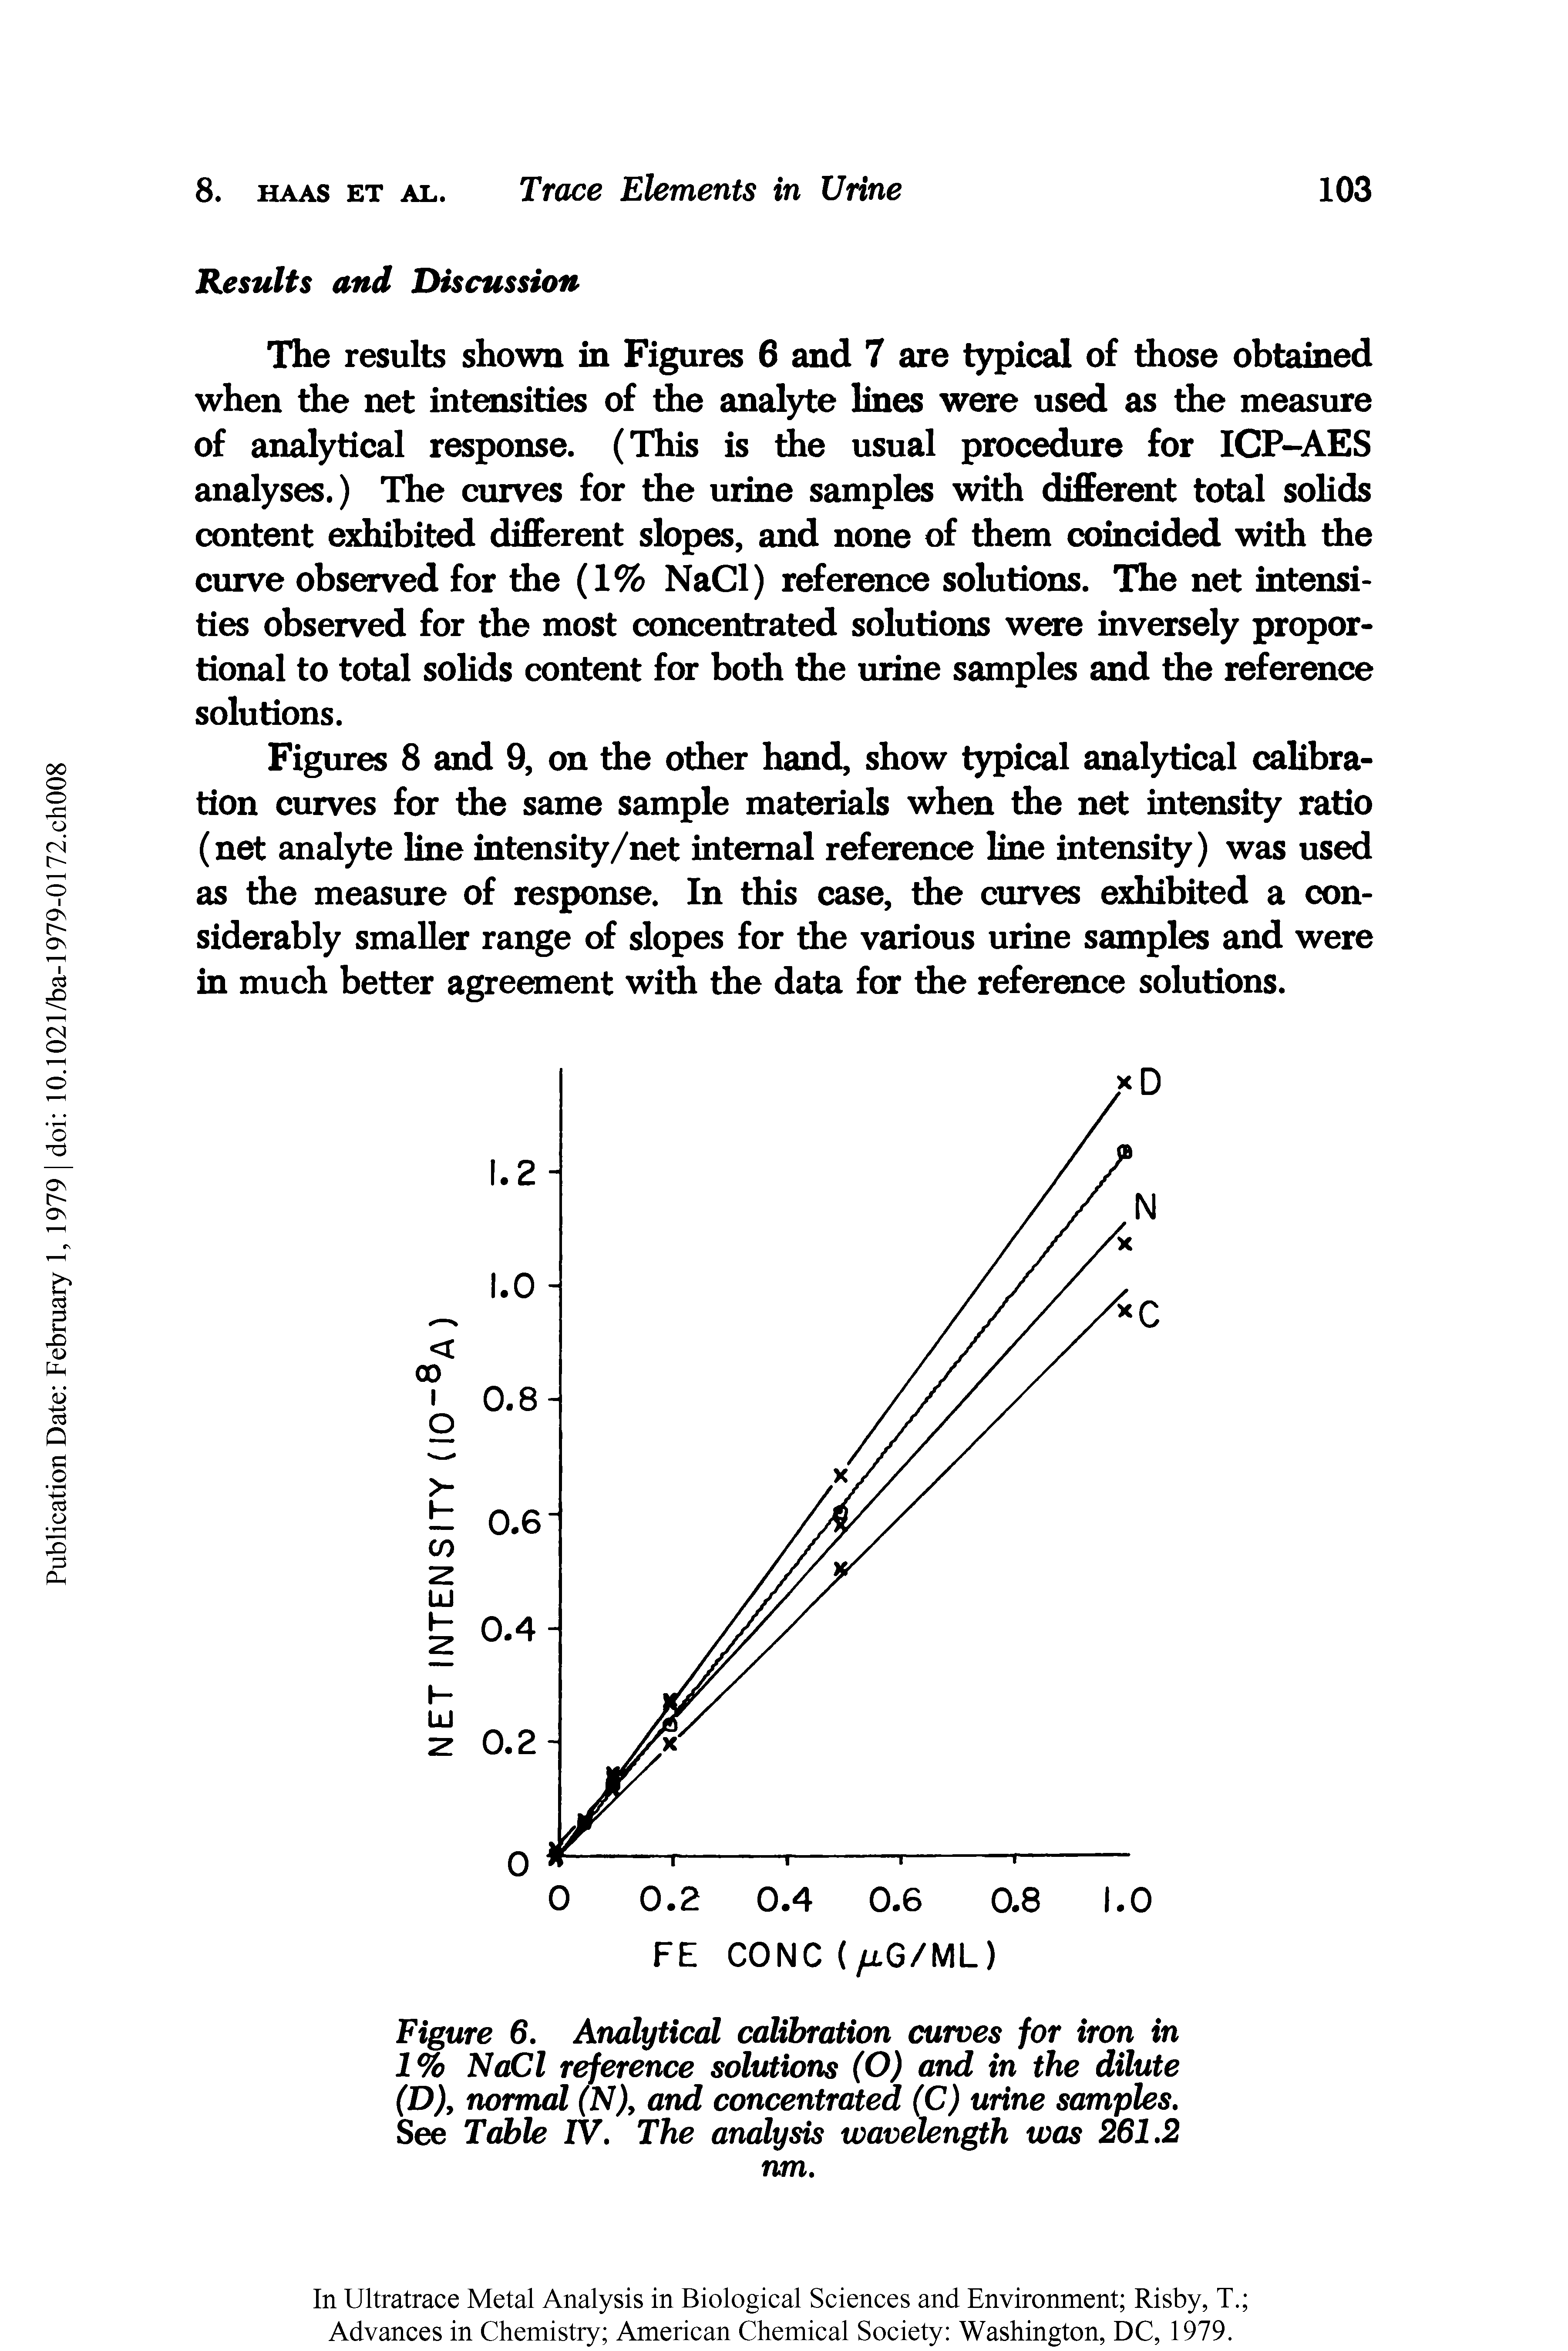 Figure 6, Analytical calibration curves for iron in 1% NaCl reference solutions (O) and in the dilute (D), normal (N)y and concentrated (C) urine samples. See Table IV, The analysis wavelength was 261,2 nm.